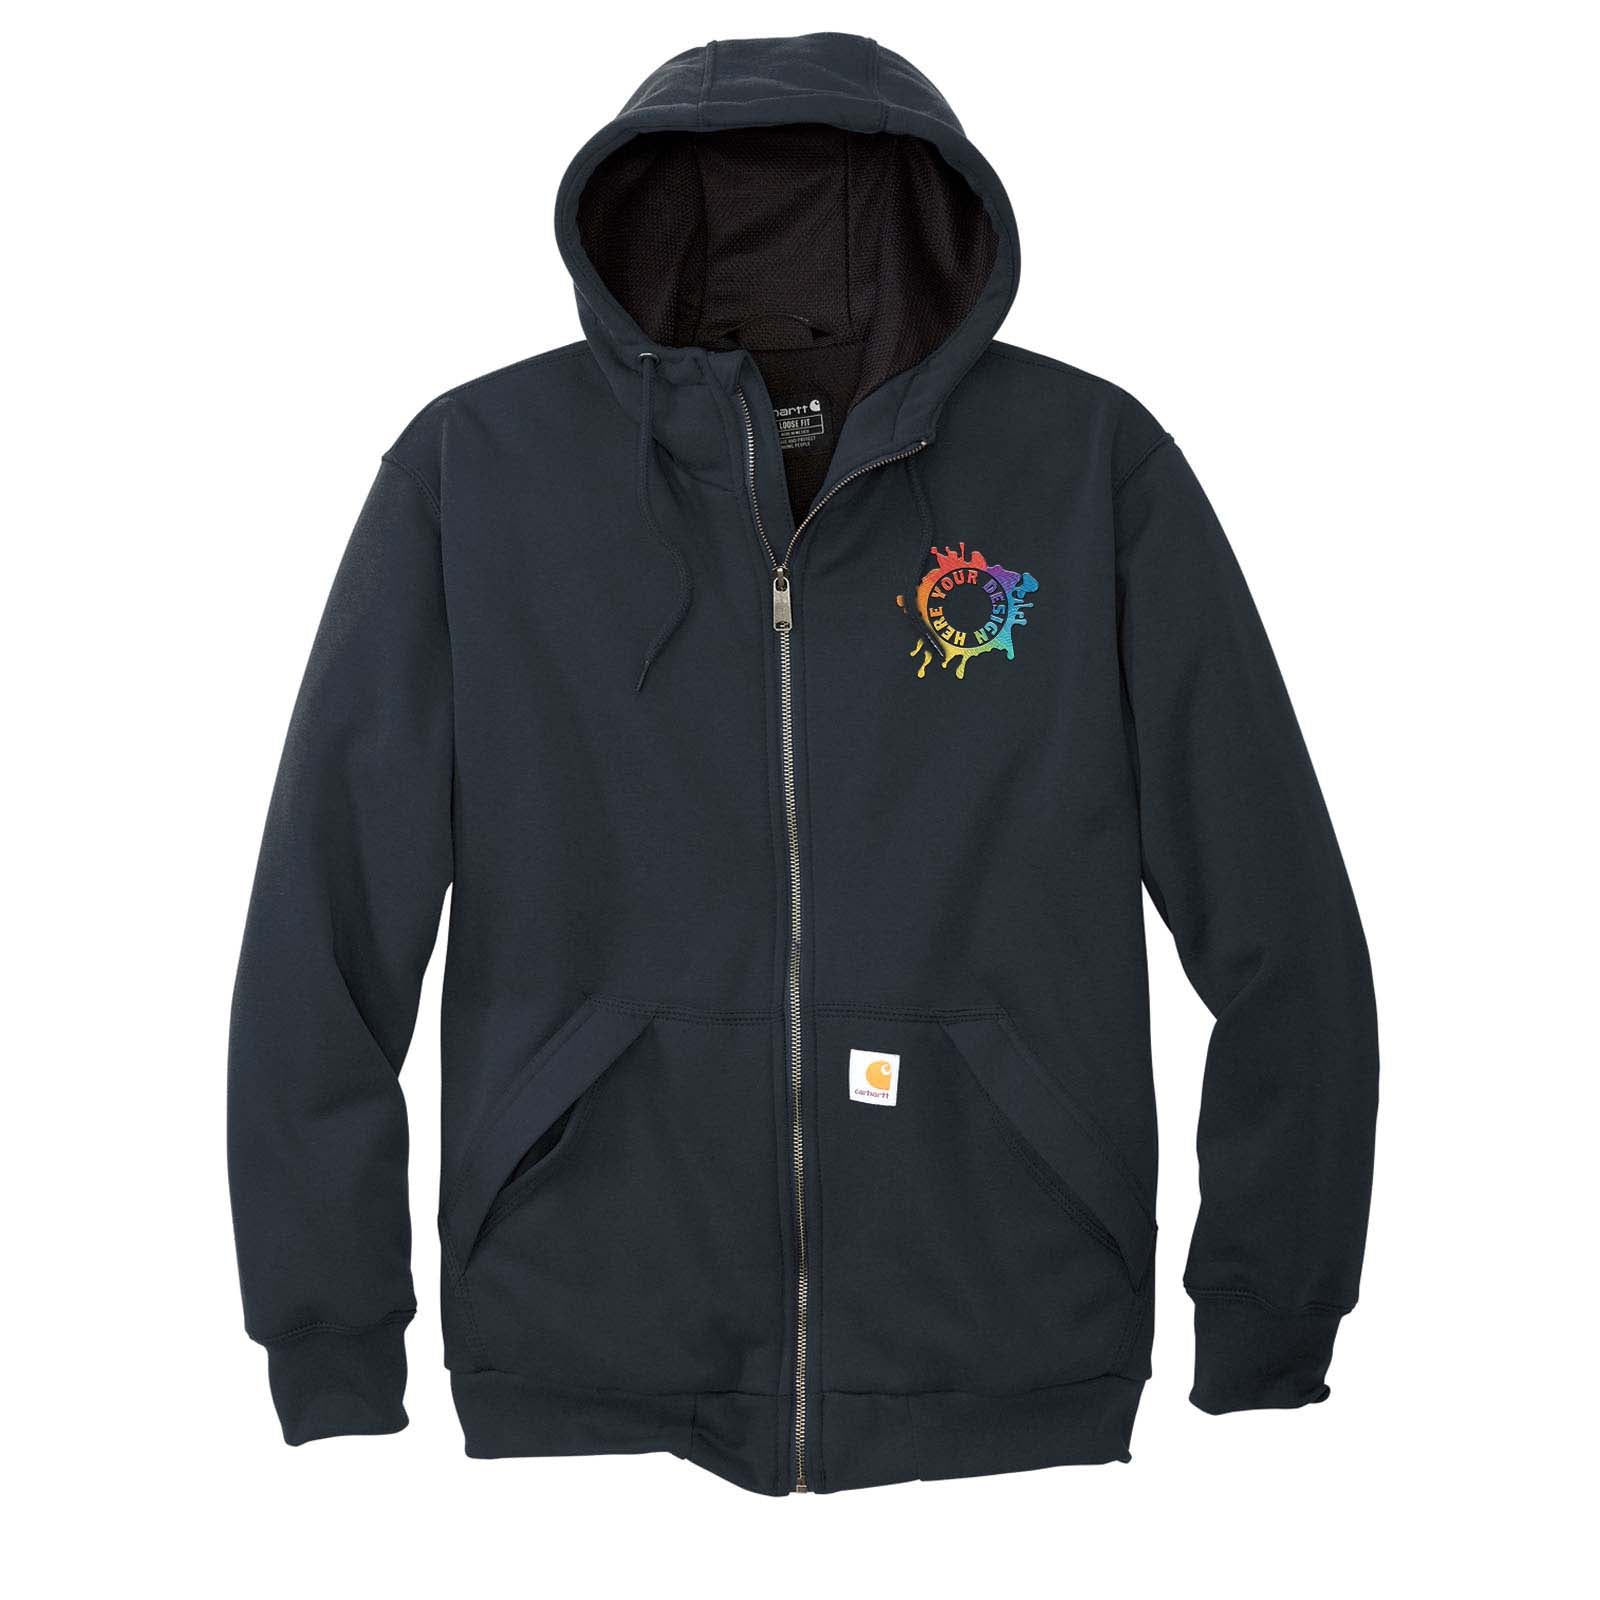 Carhartt® Midweight Thermal-Lined Full-Zip Sweatshirt Embroidery - Mato & Hash